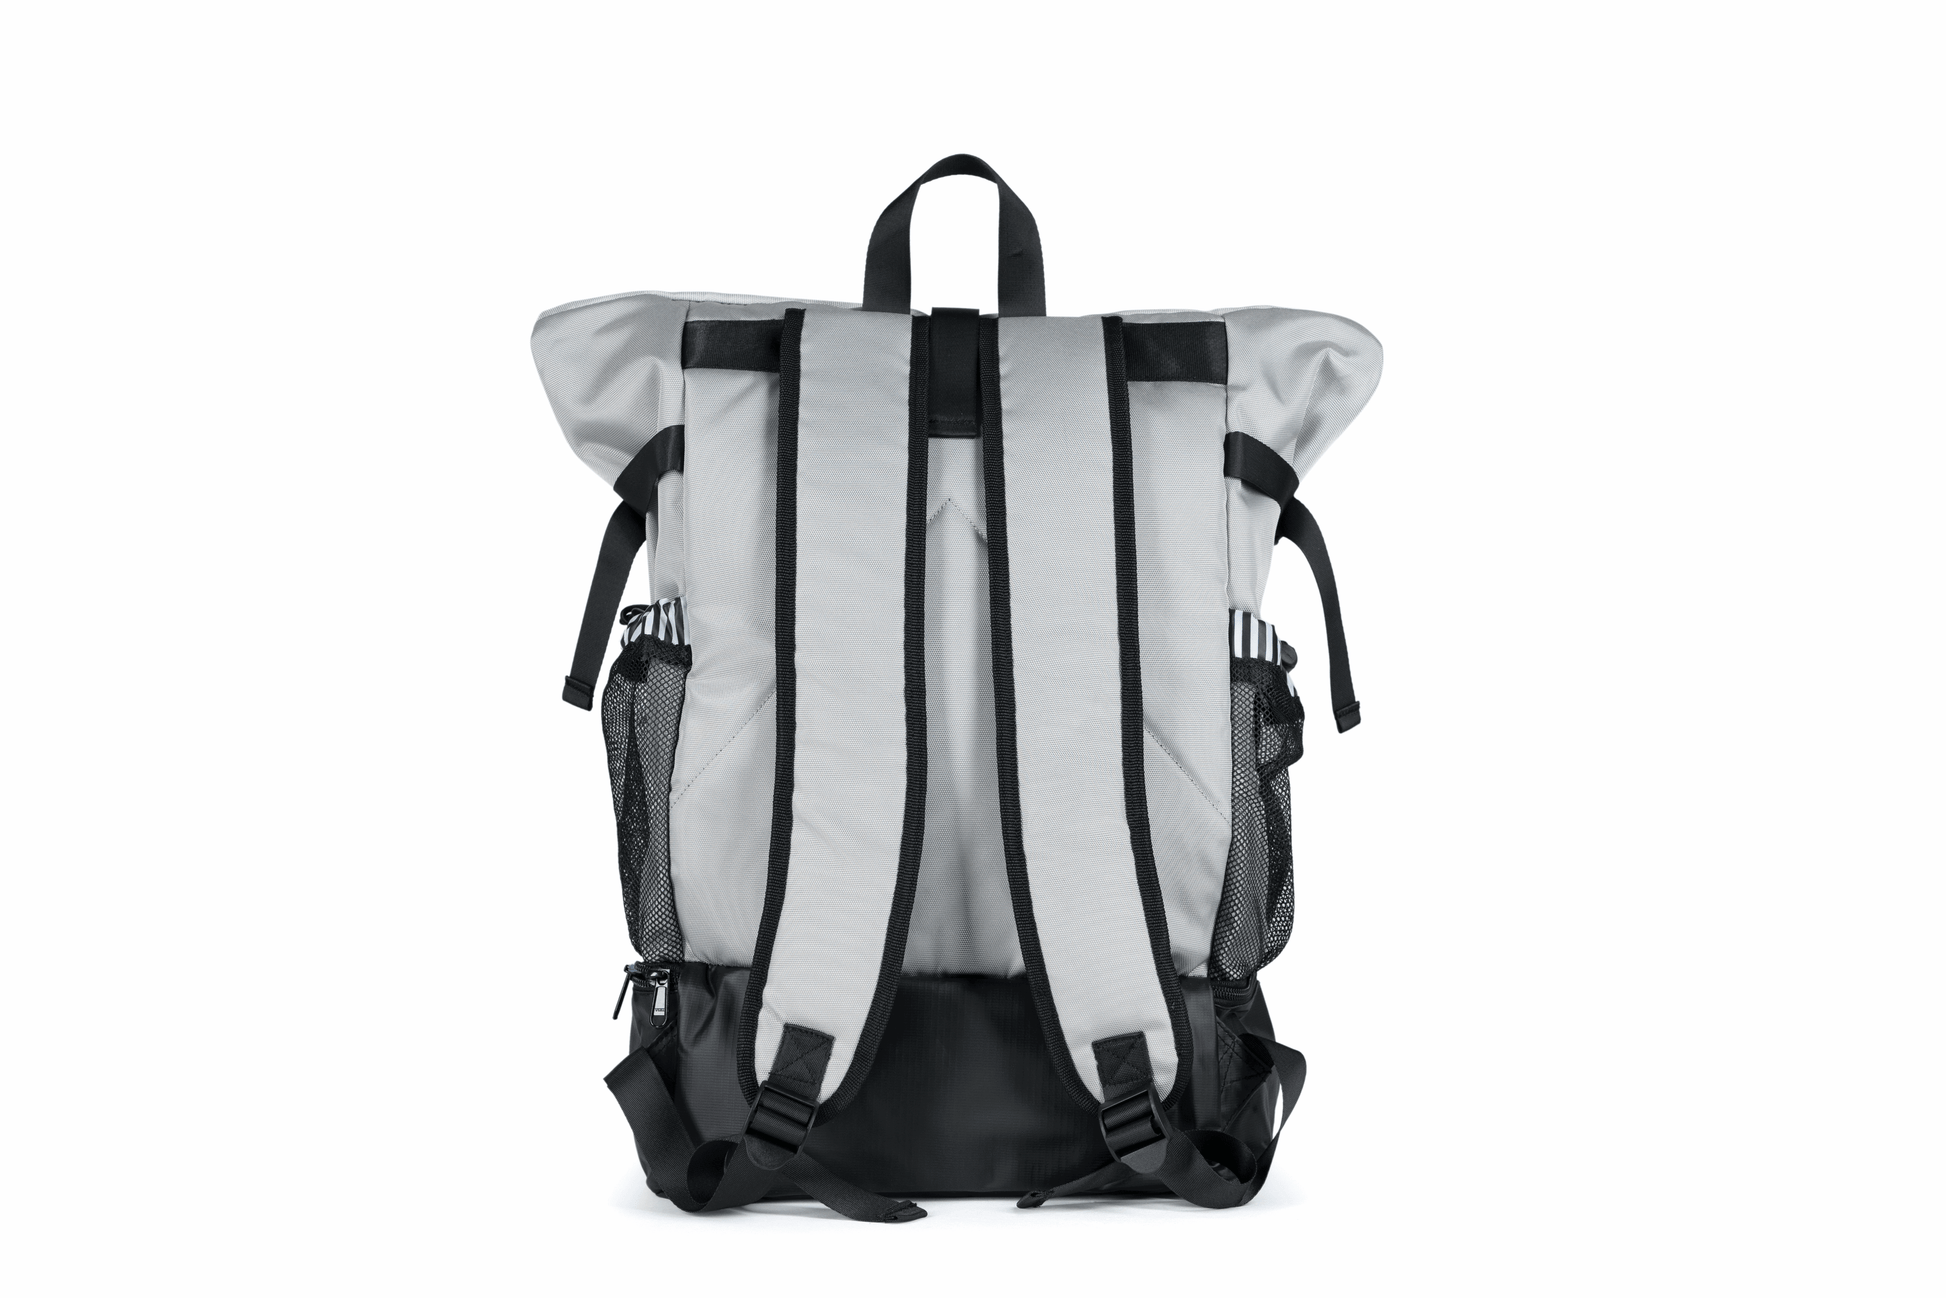 The Roo betty Nyx back pack has padded shoulder straps for comfort 